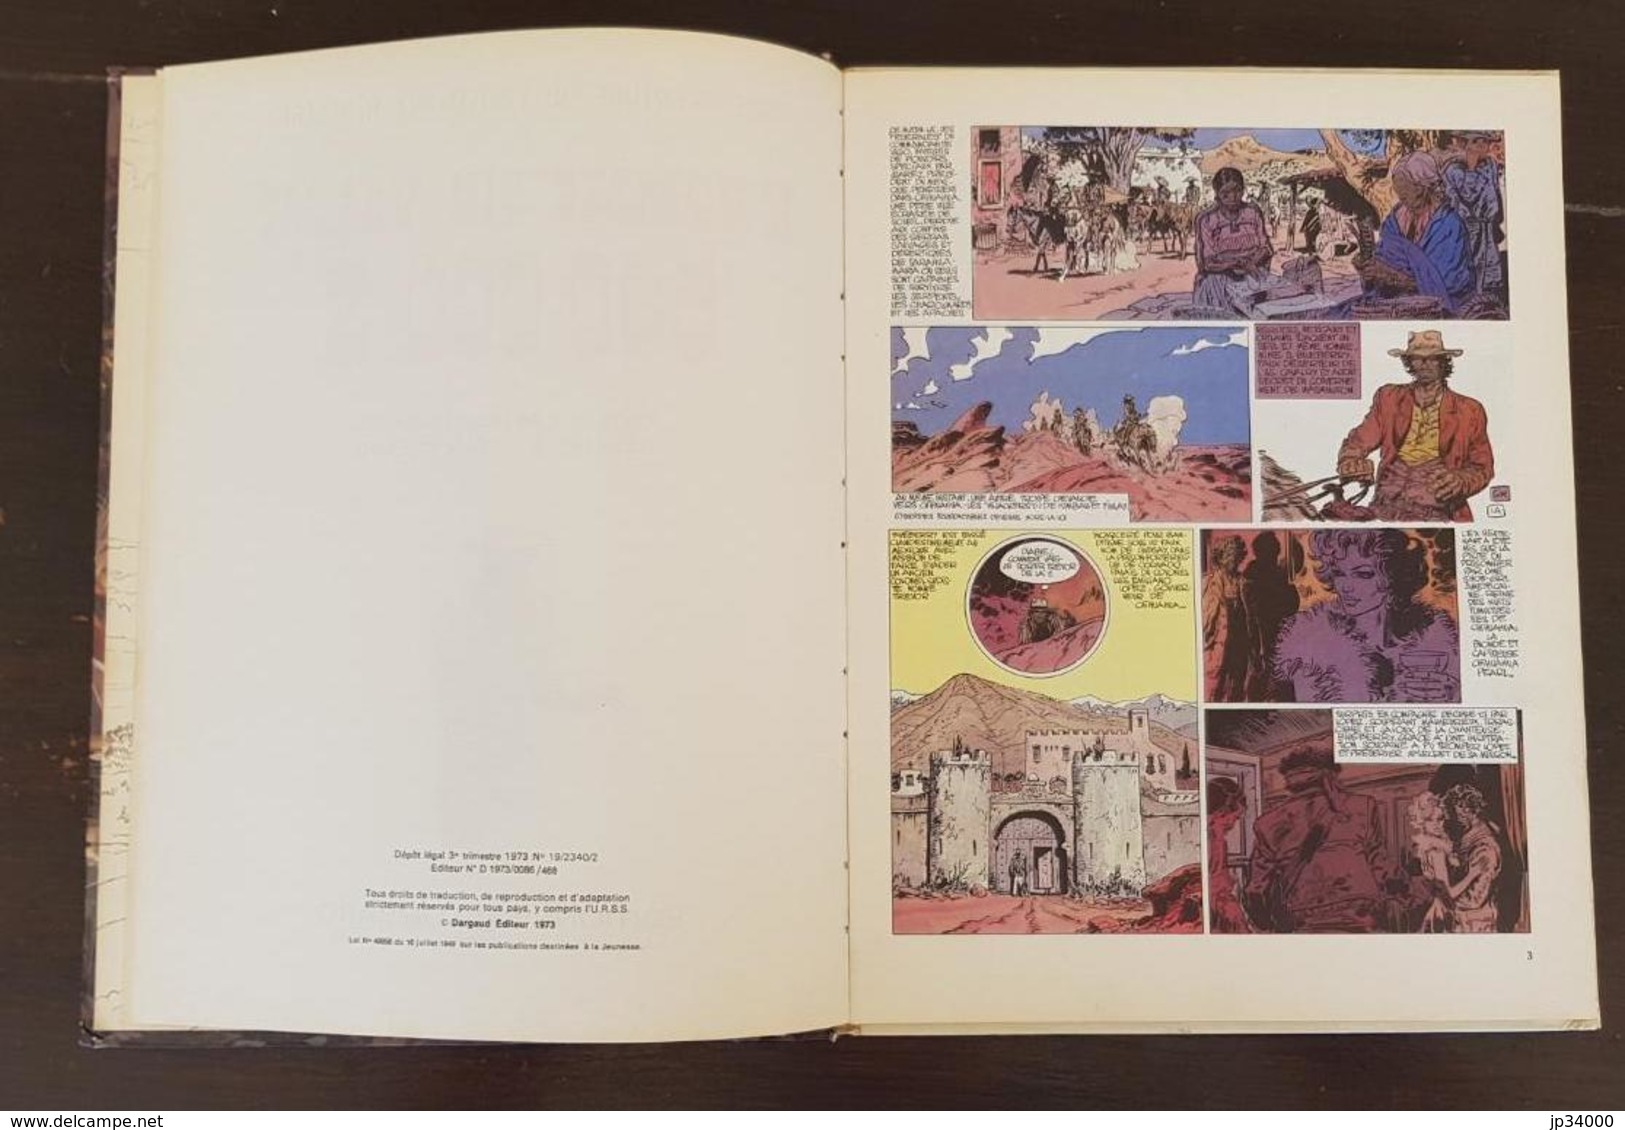 BLUEBERRY: L'homme Qui Valait 500 000$ EO 1973. Giraud Charlier. Ed Du Lombard (A) - Blueberry